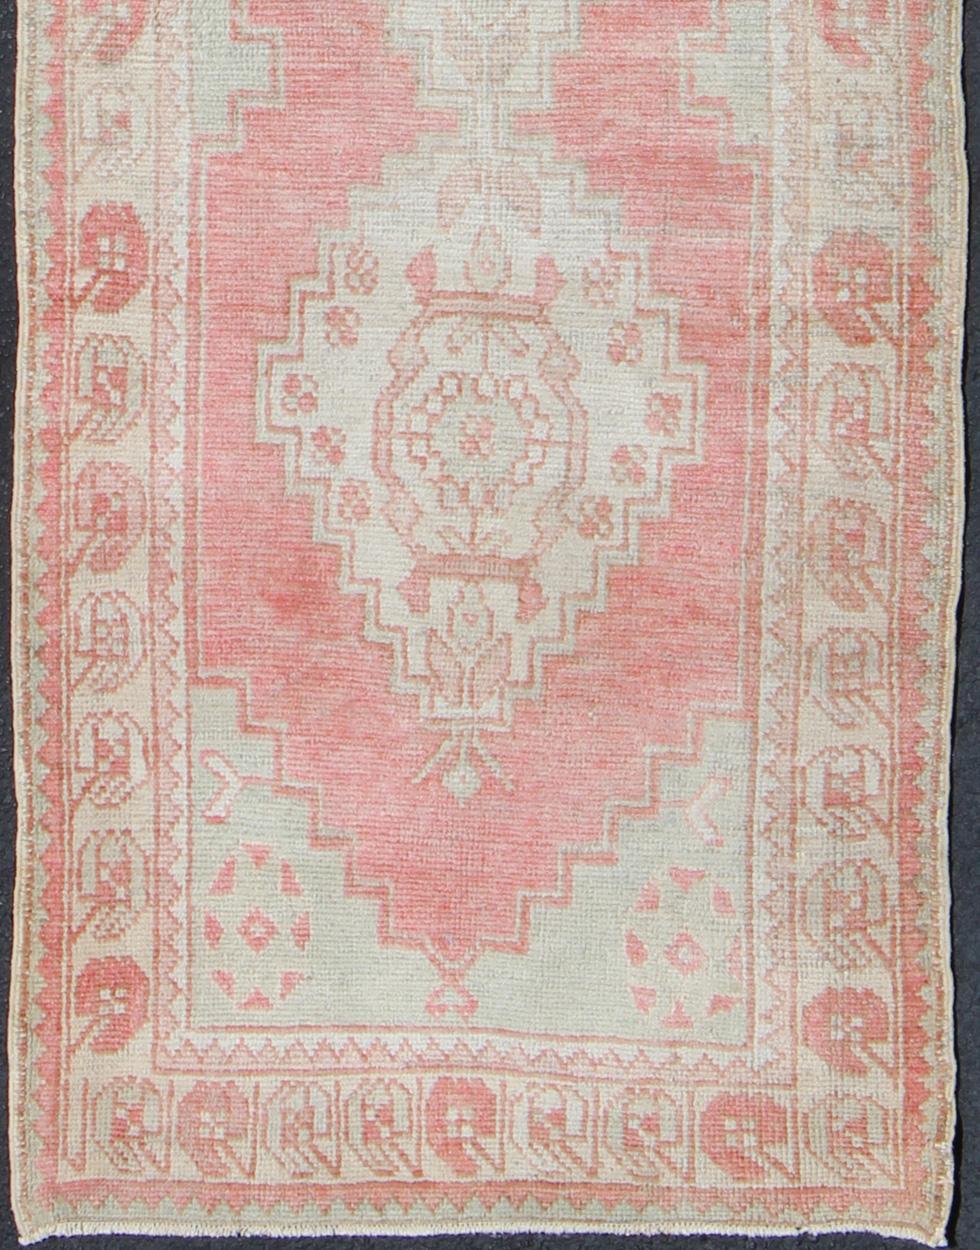 Vintage Oushak runner from Turkey with vertical medallion design in coral, ivory, and light green, rug en-176247, country of origin / type: Turkey / Oushak, circa 1940

This beautiful vintage Oushak runner from 1940s Turkey features a Classic